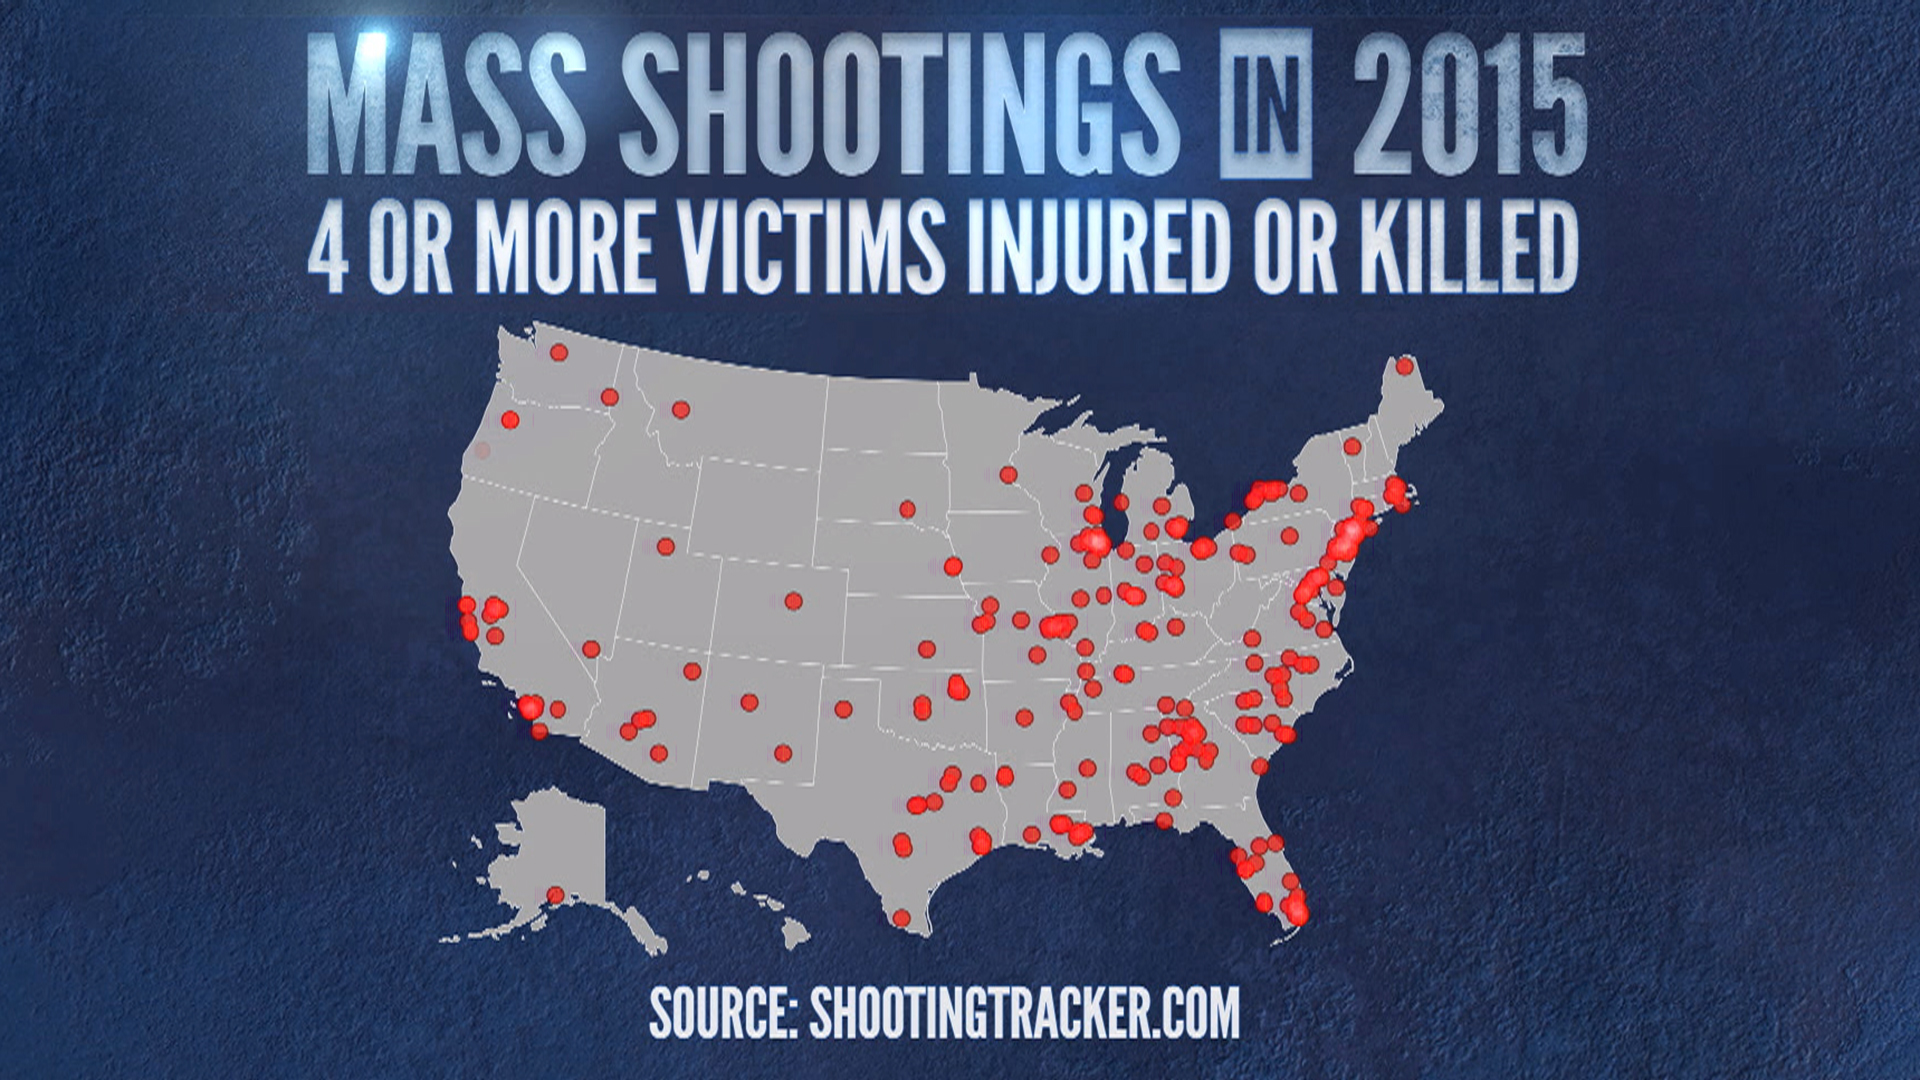 Are mass shootings in the US on the rise? A look at the numbers - TODAY.com